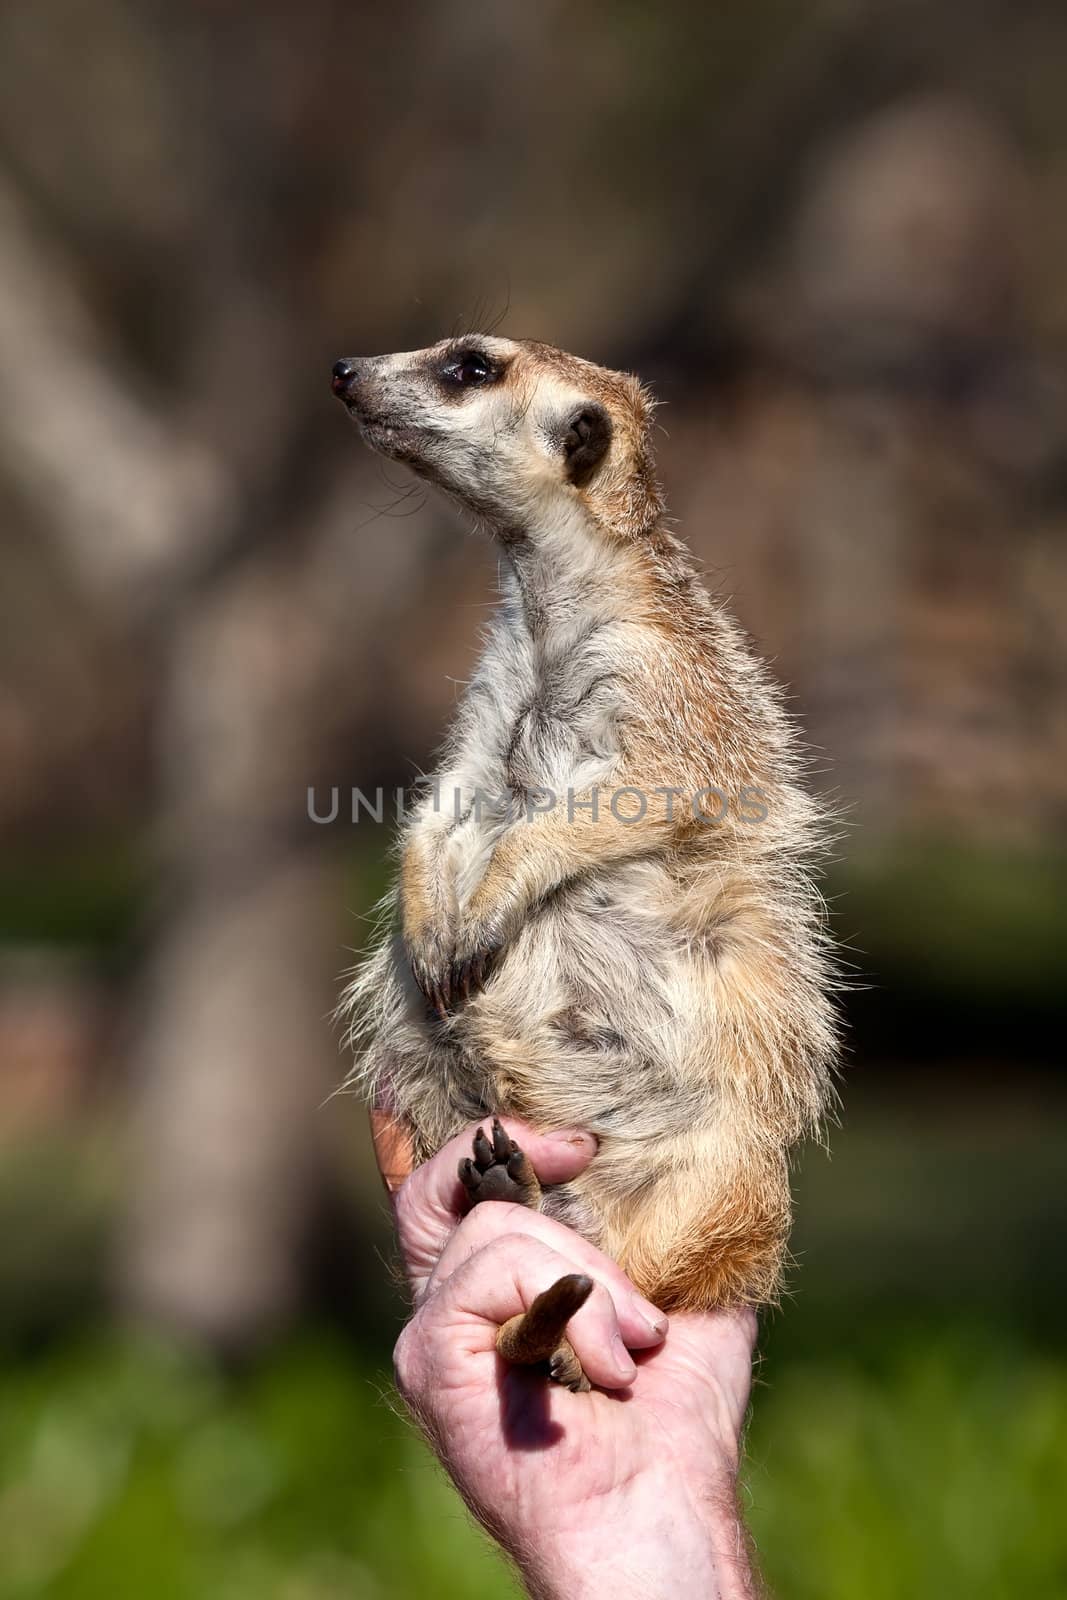 Close up on a meerkat standing upright in a hand